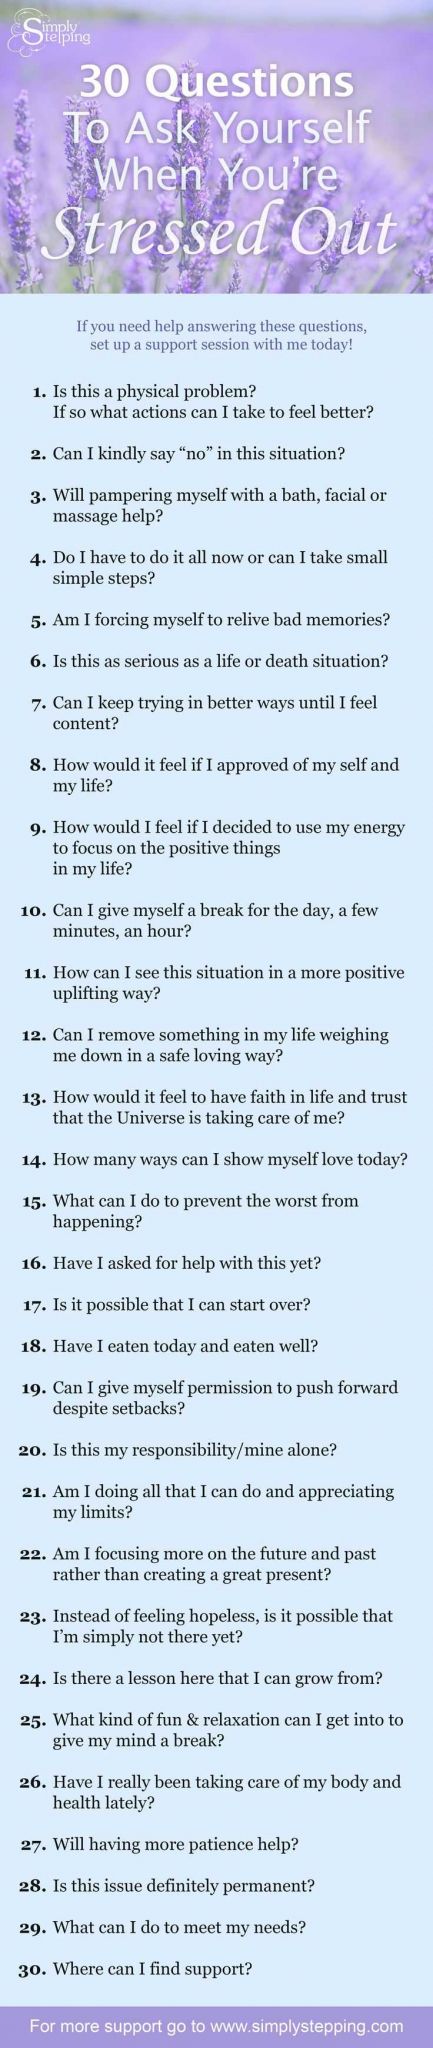 Anxiety Management Worksheets as Well as 1017 Best Hittin the Books Images On Pinterest